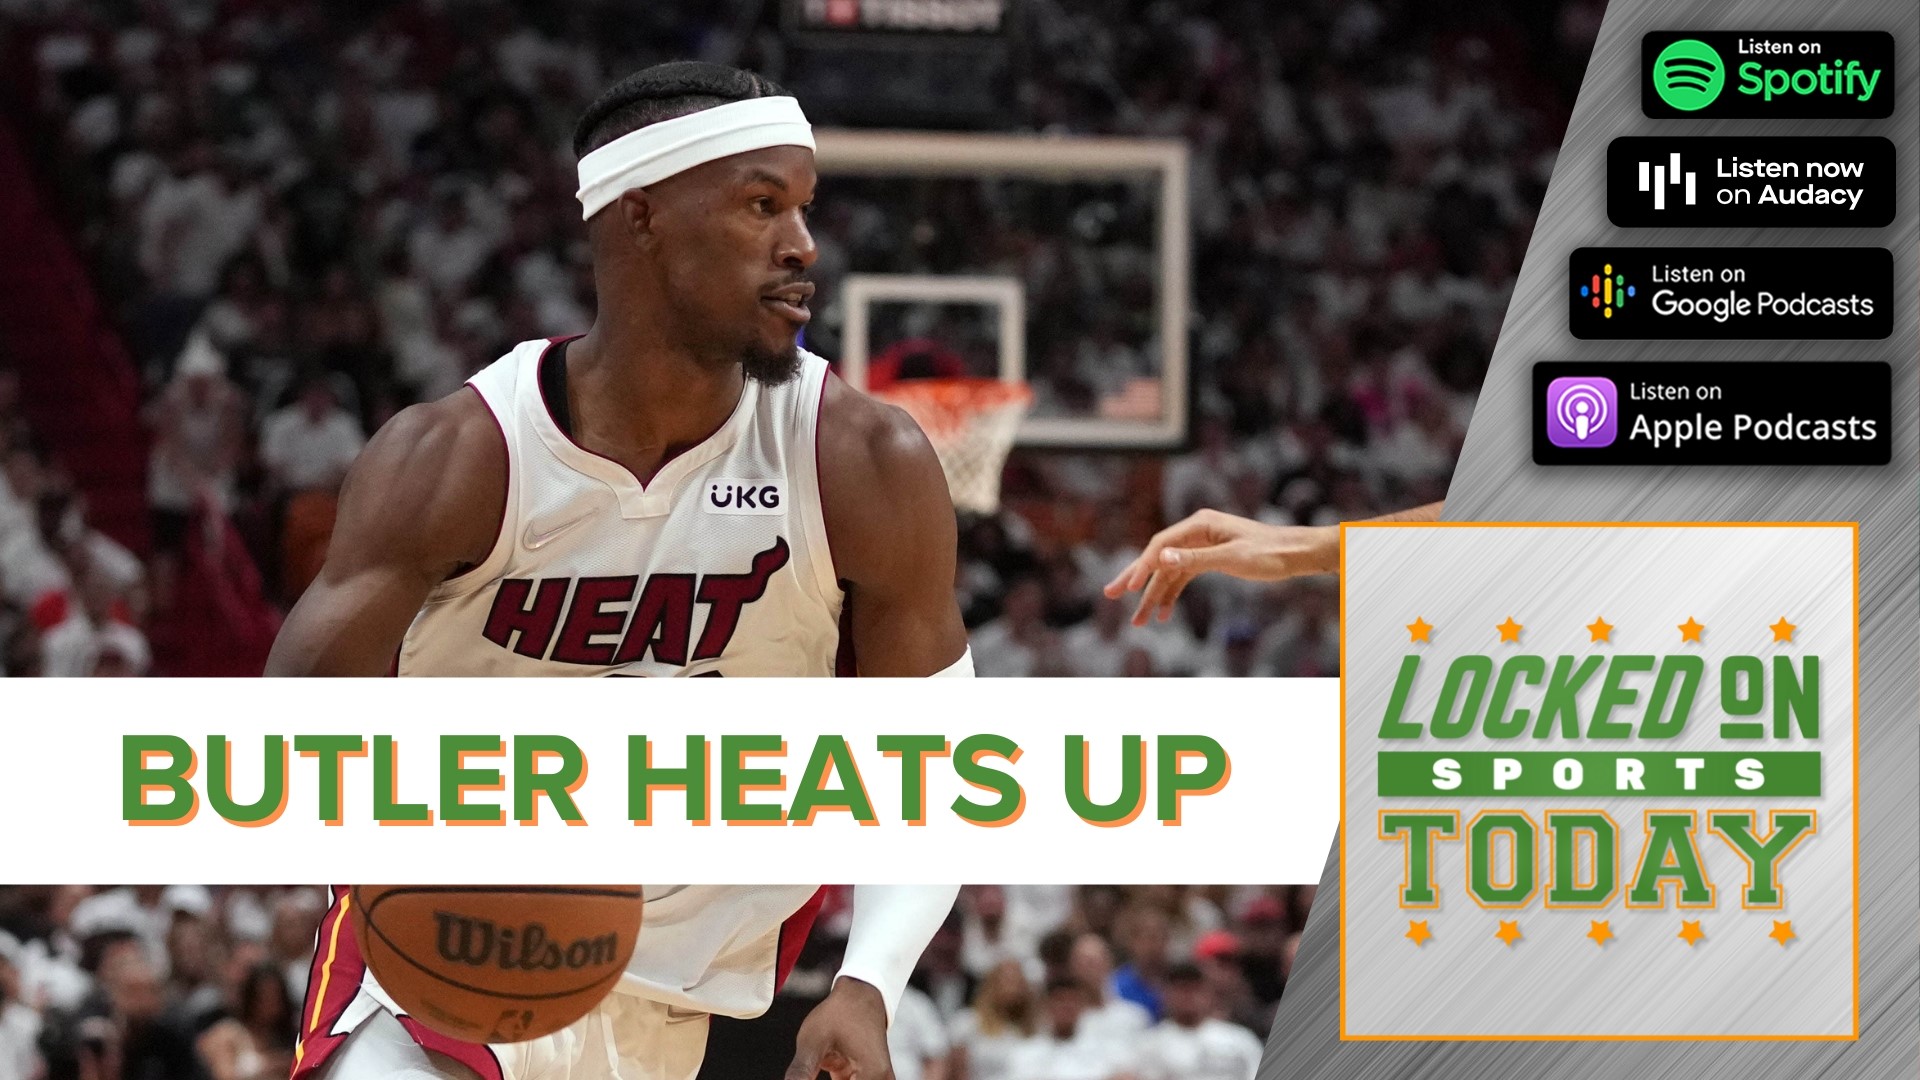 A deeper dive into some of the day's top sports stories like the Heat taking off in the NBA playoffs, PGA championship preps, and where teams stand in the NBA draft